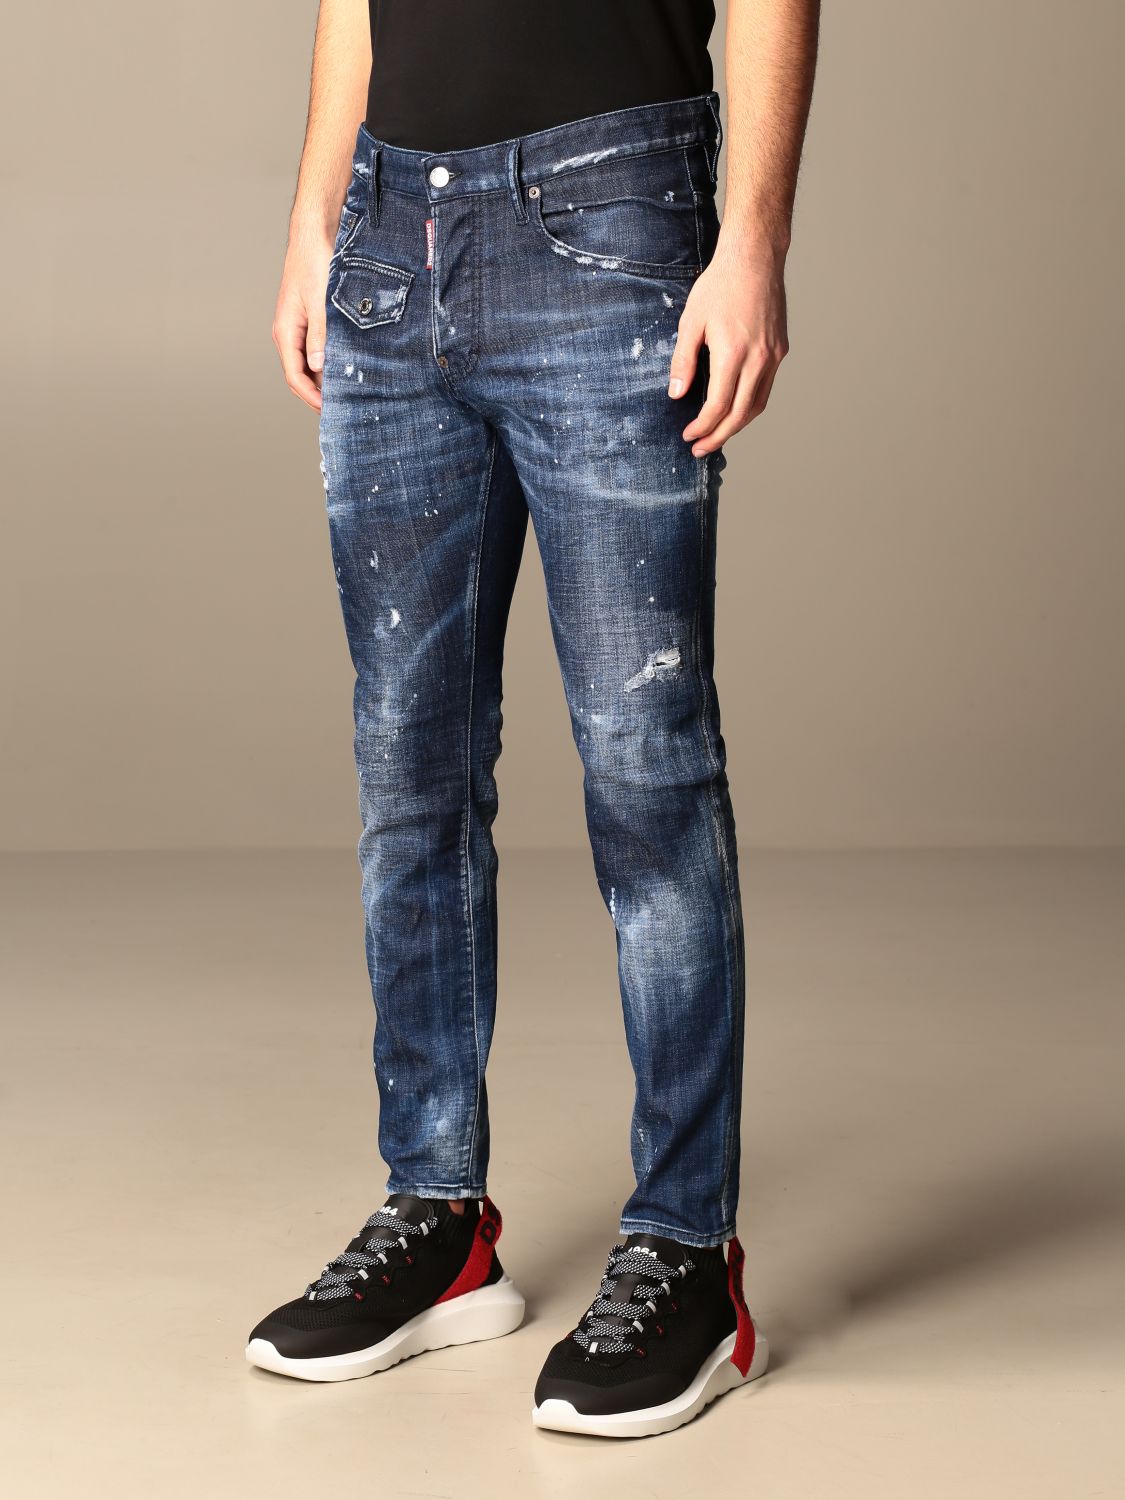 Dsquared2 5-pocket Skater jeans in used denim with rips and zip